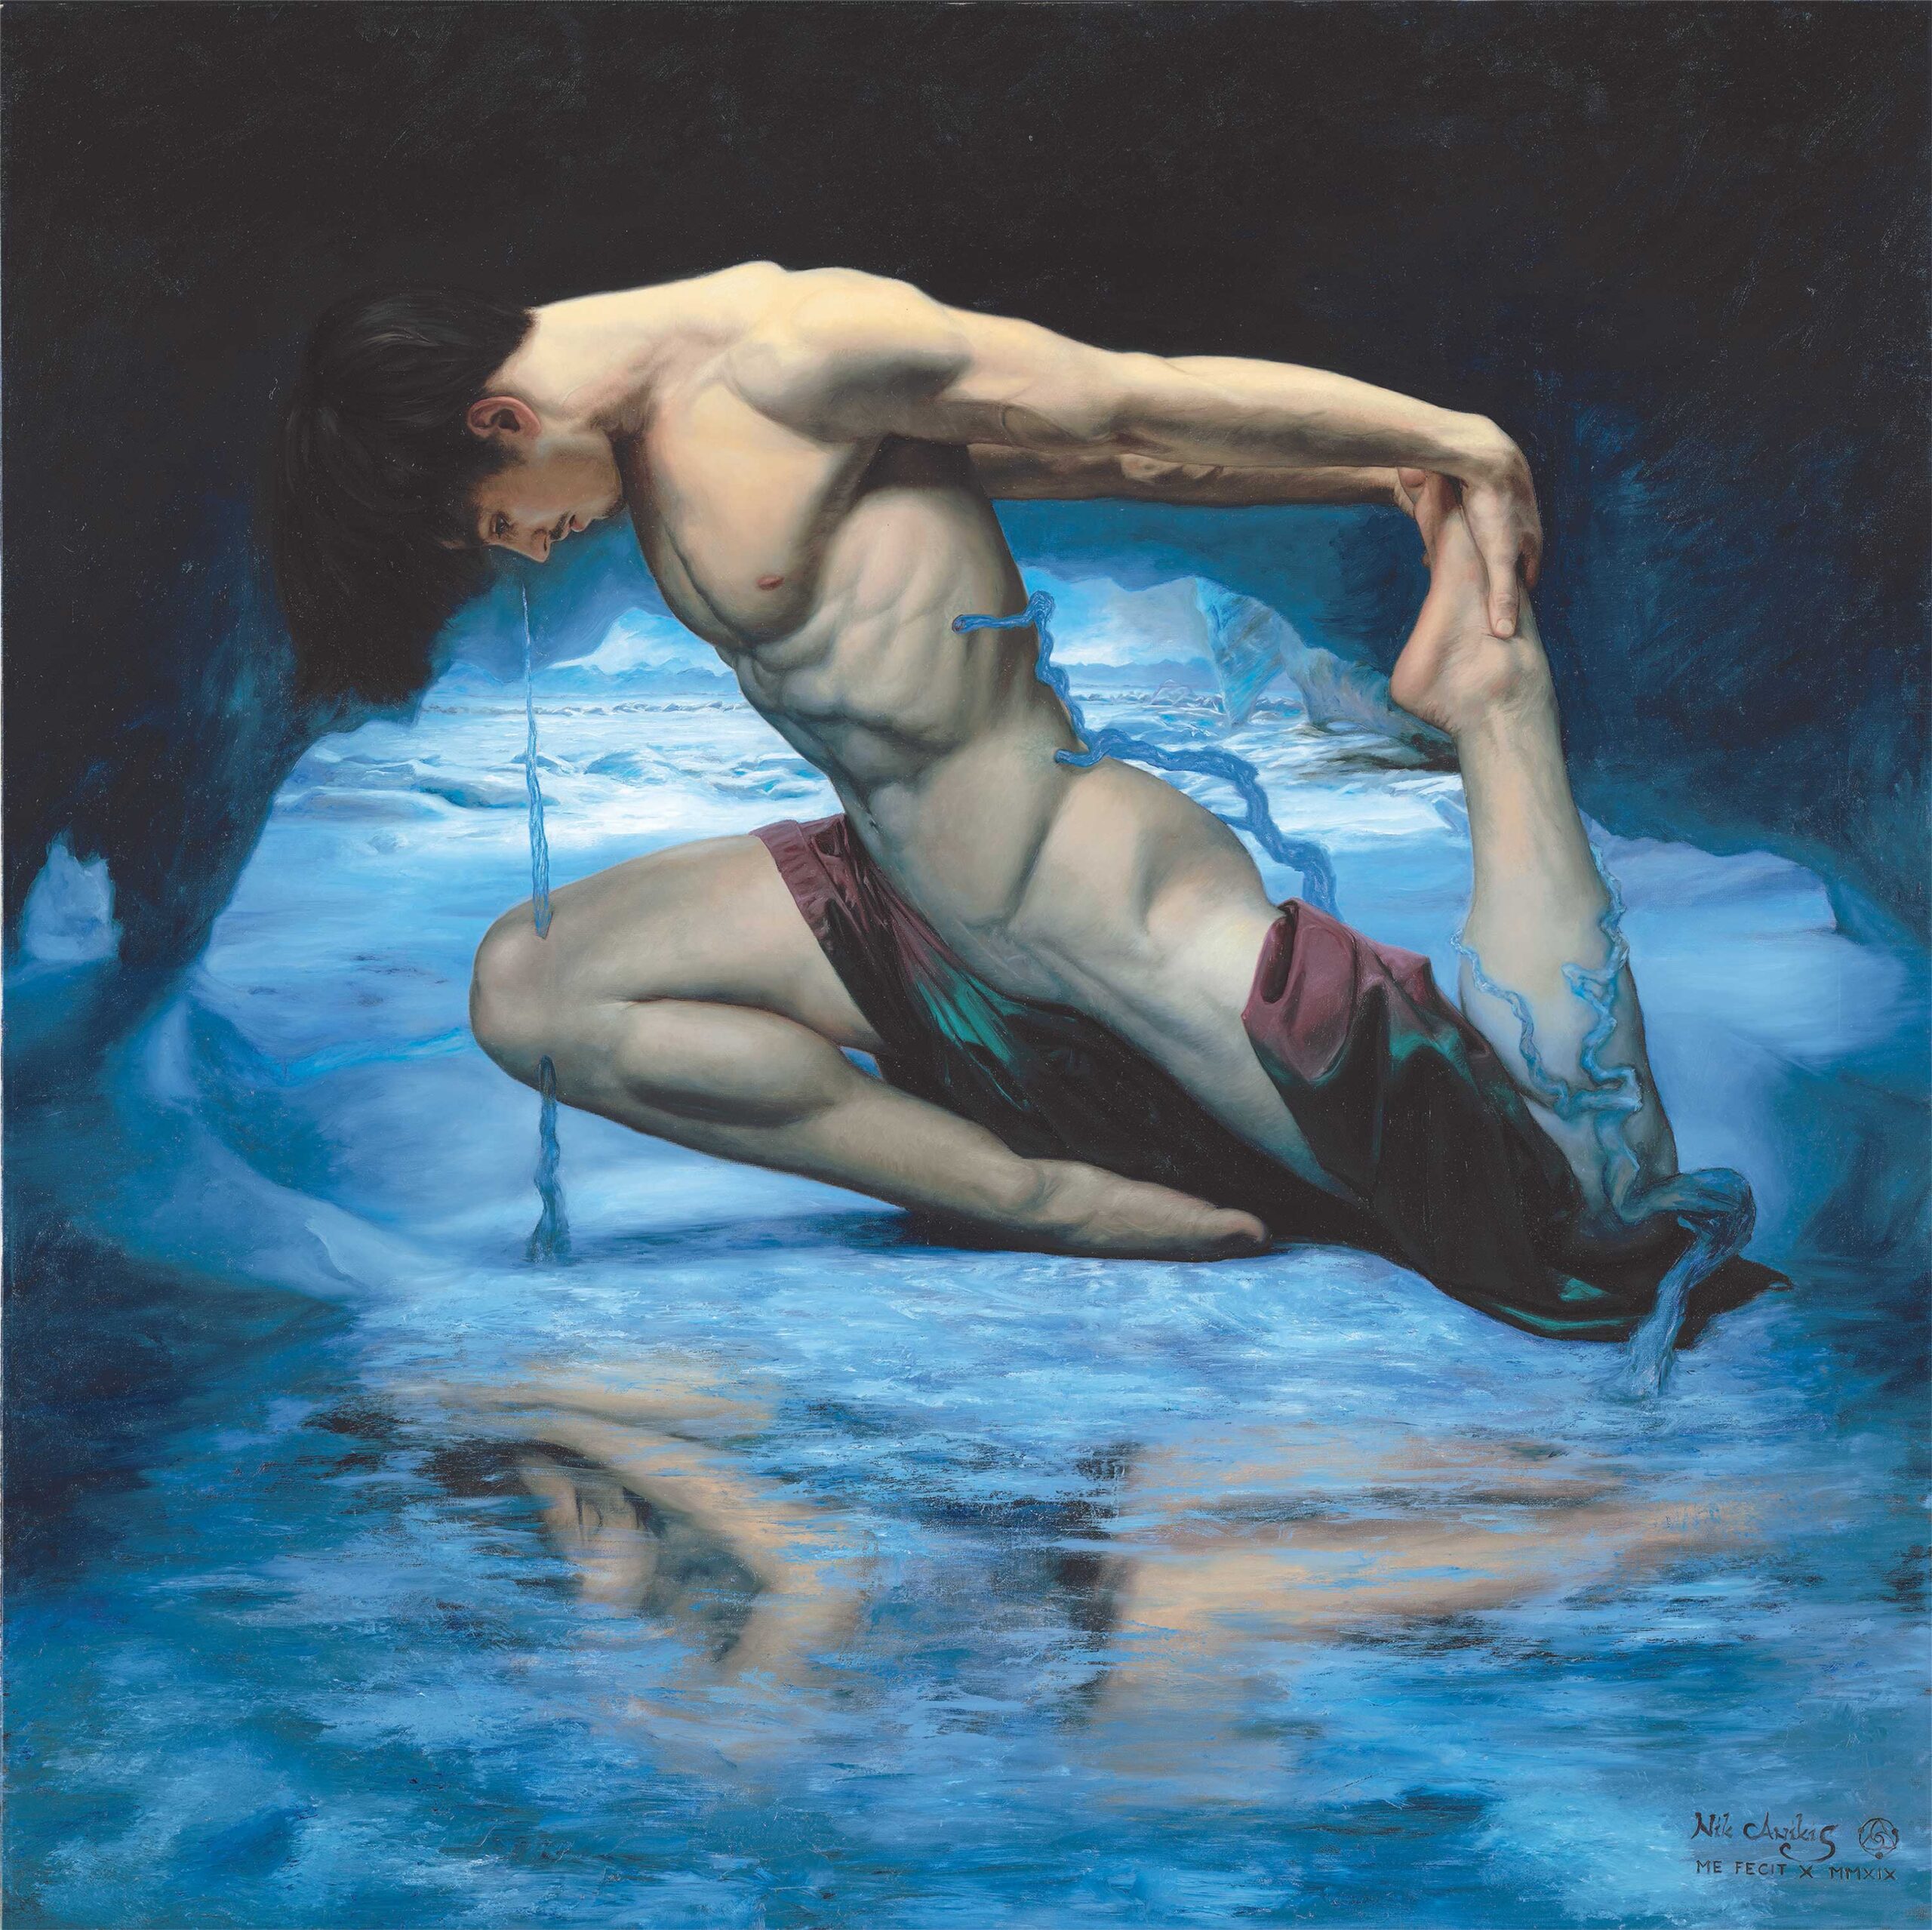 Contemporary realism figurative art - Nik Anikis (b. 1990), "The Curse of Triton," 2019, oil on canvas, 51 x 51 in., available through the artist